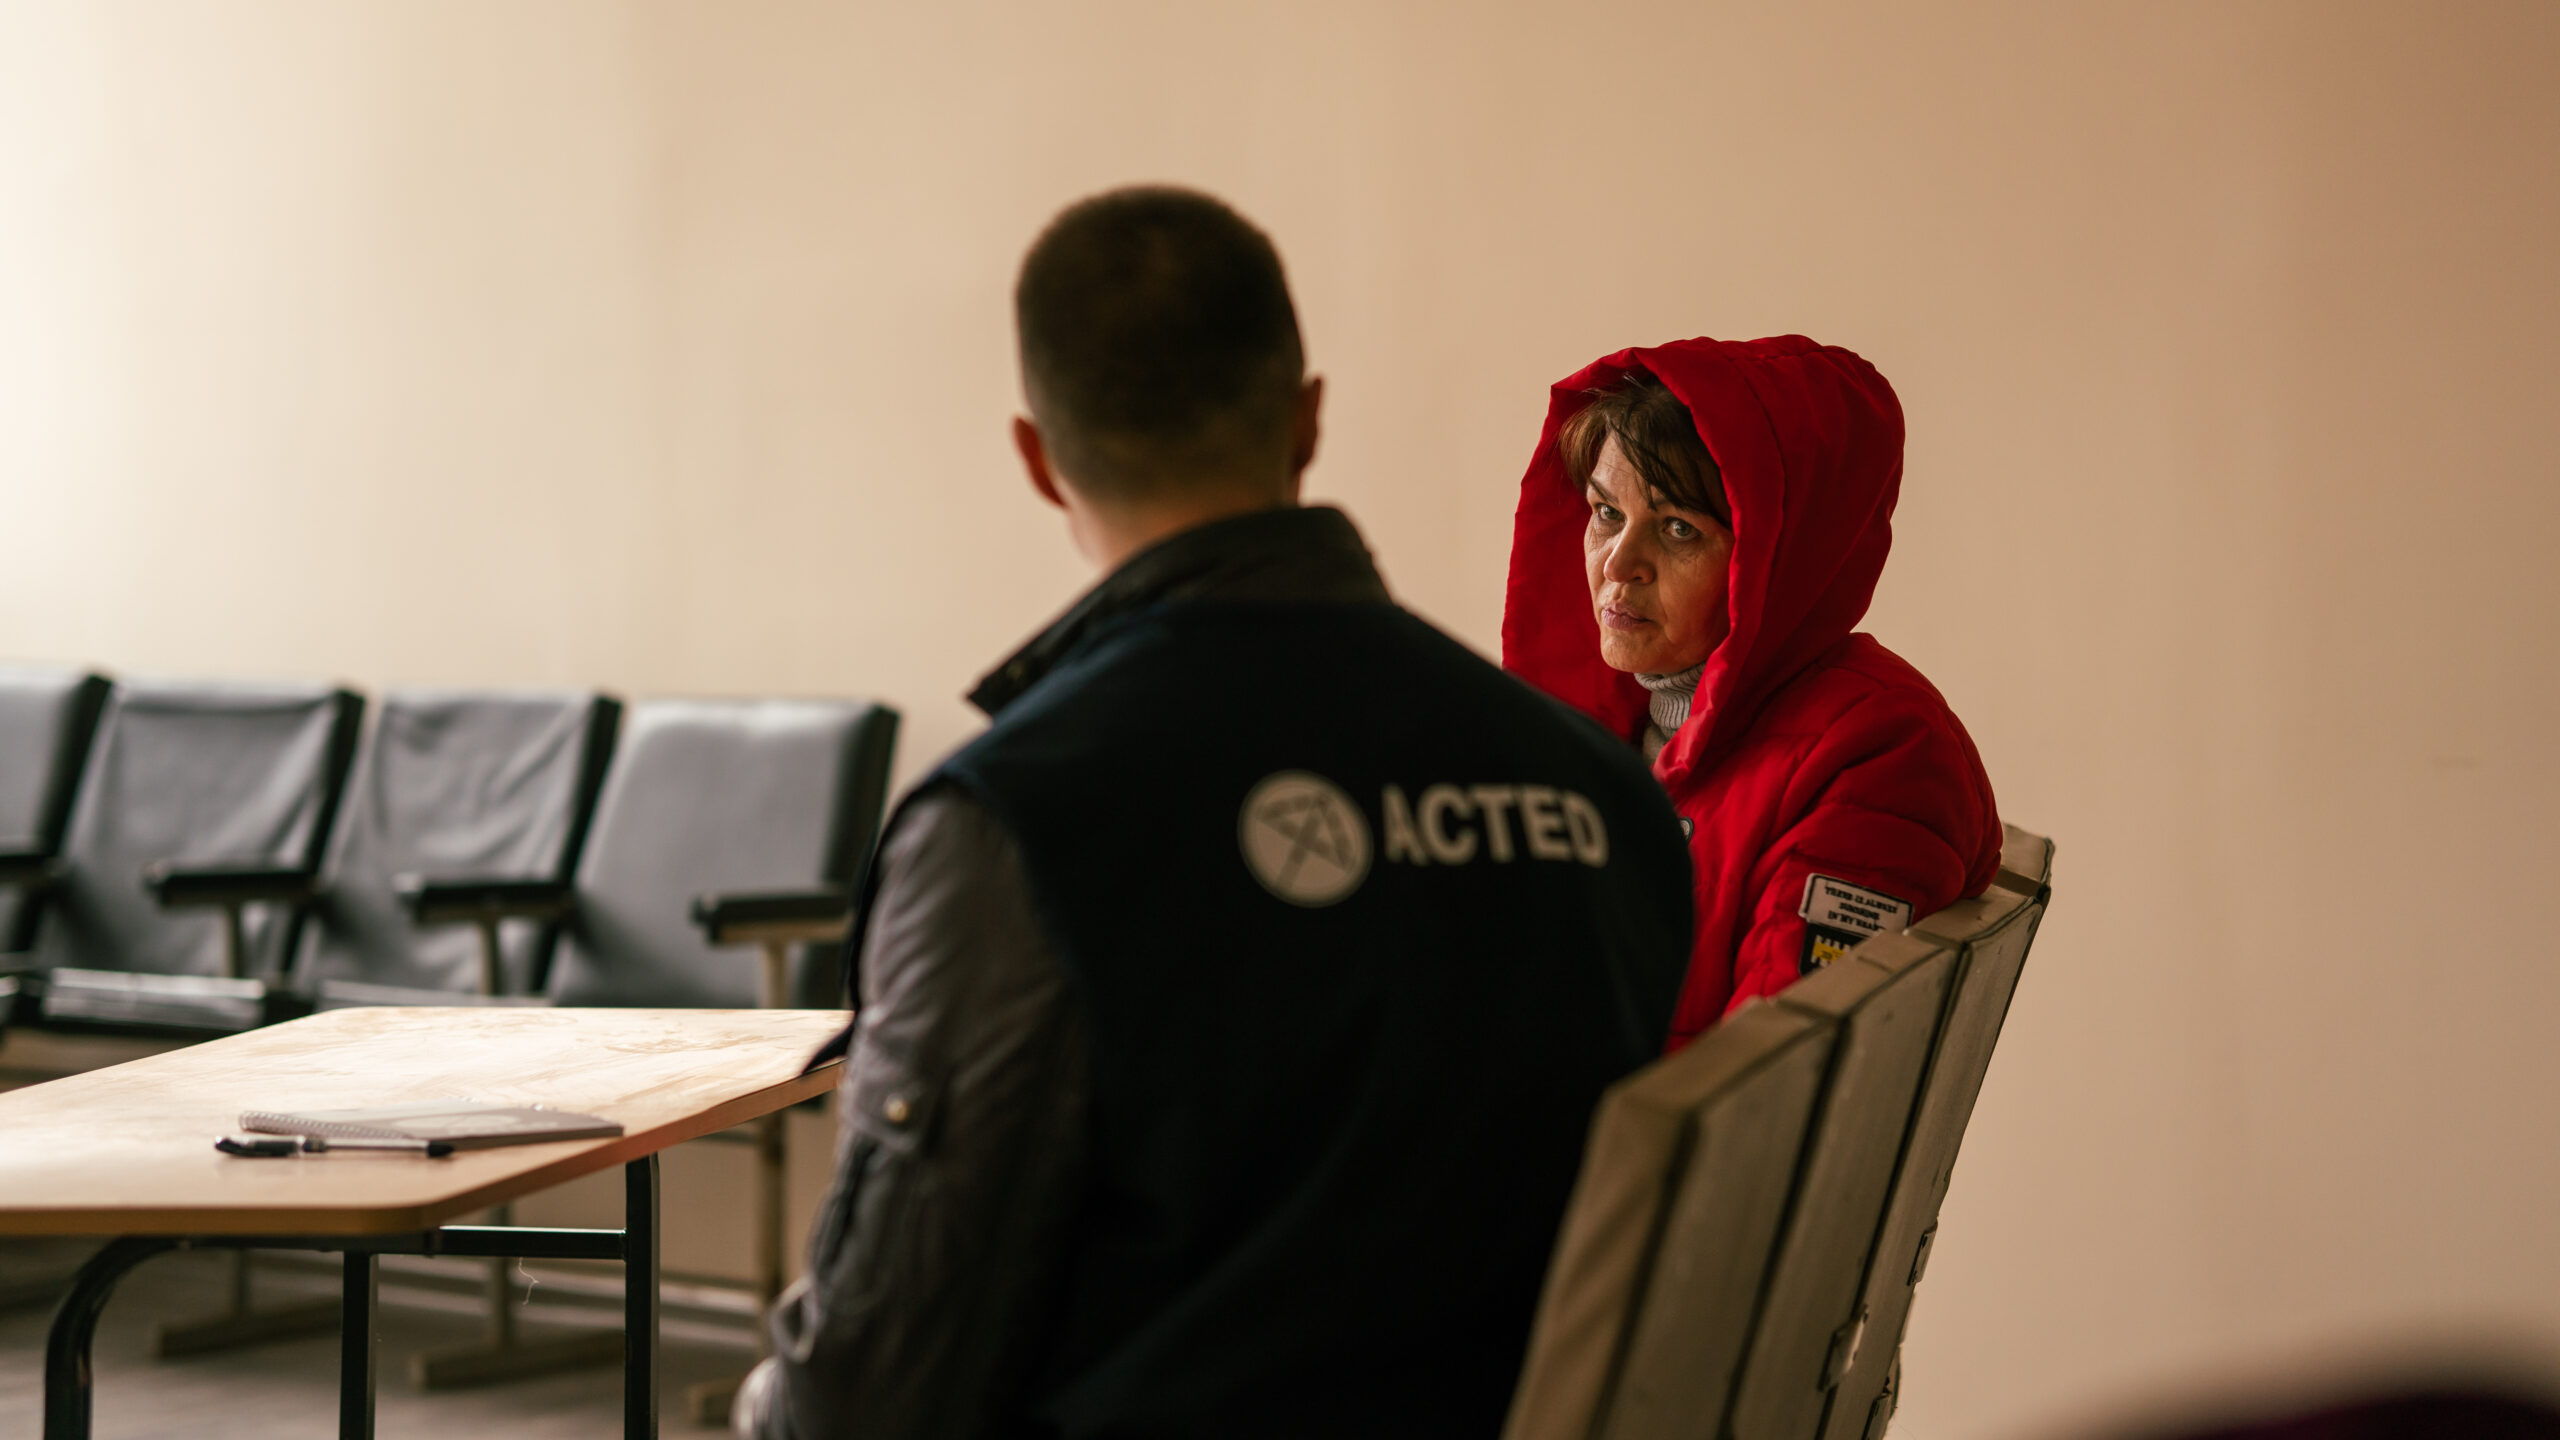 In Ukraine, Acted supports war-affected people who fled their villages with  multi-purpose cash assistance - ACTED